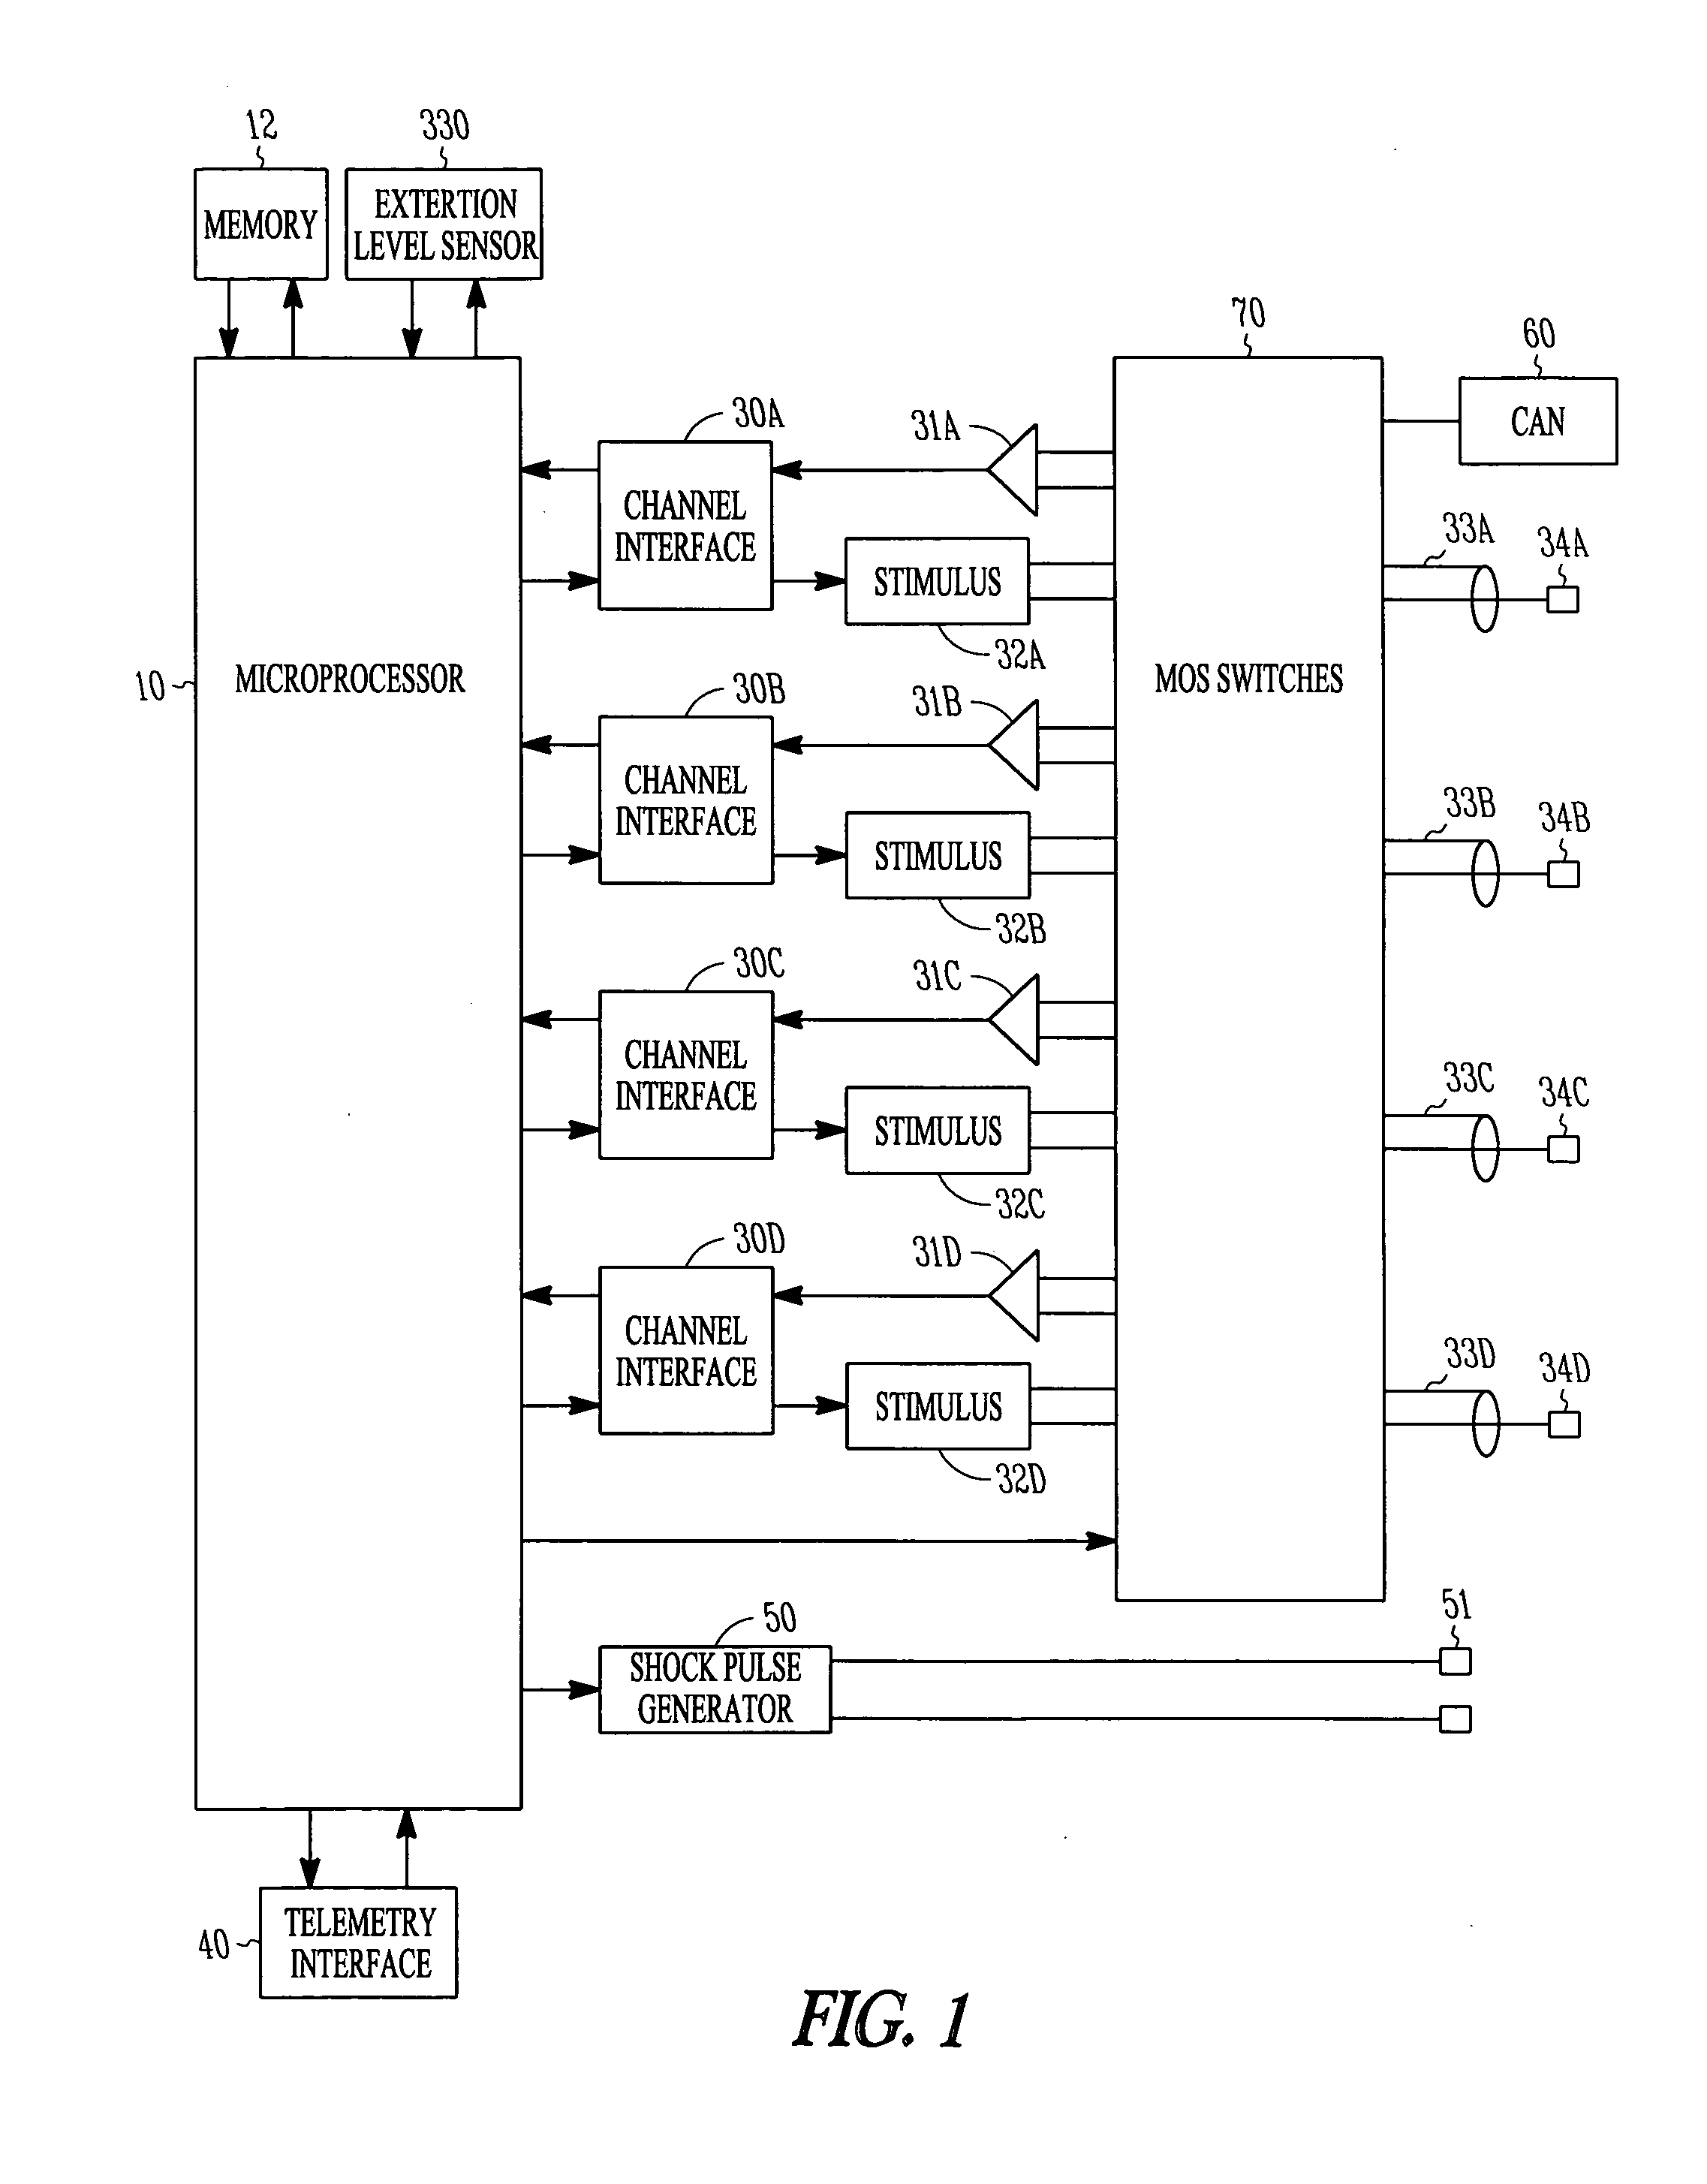 Pacing method and device for preserving native conduction system